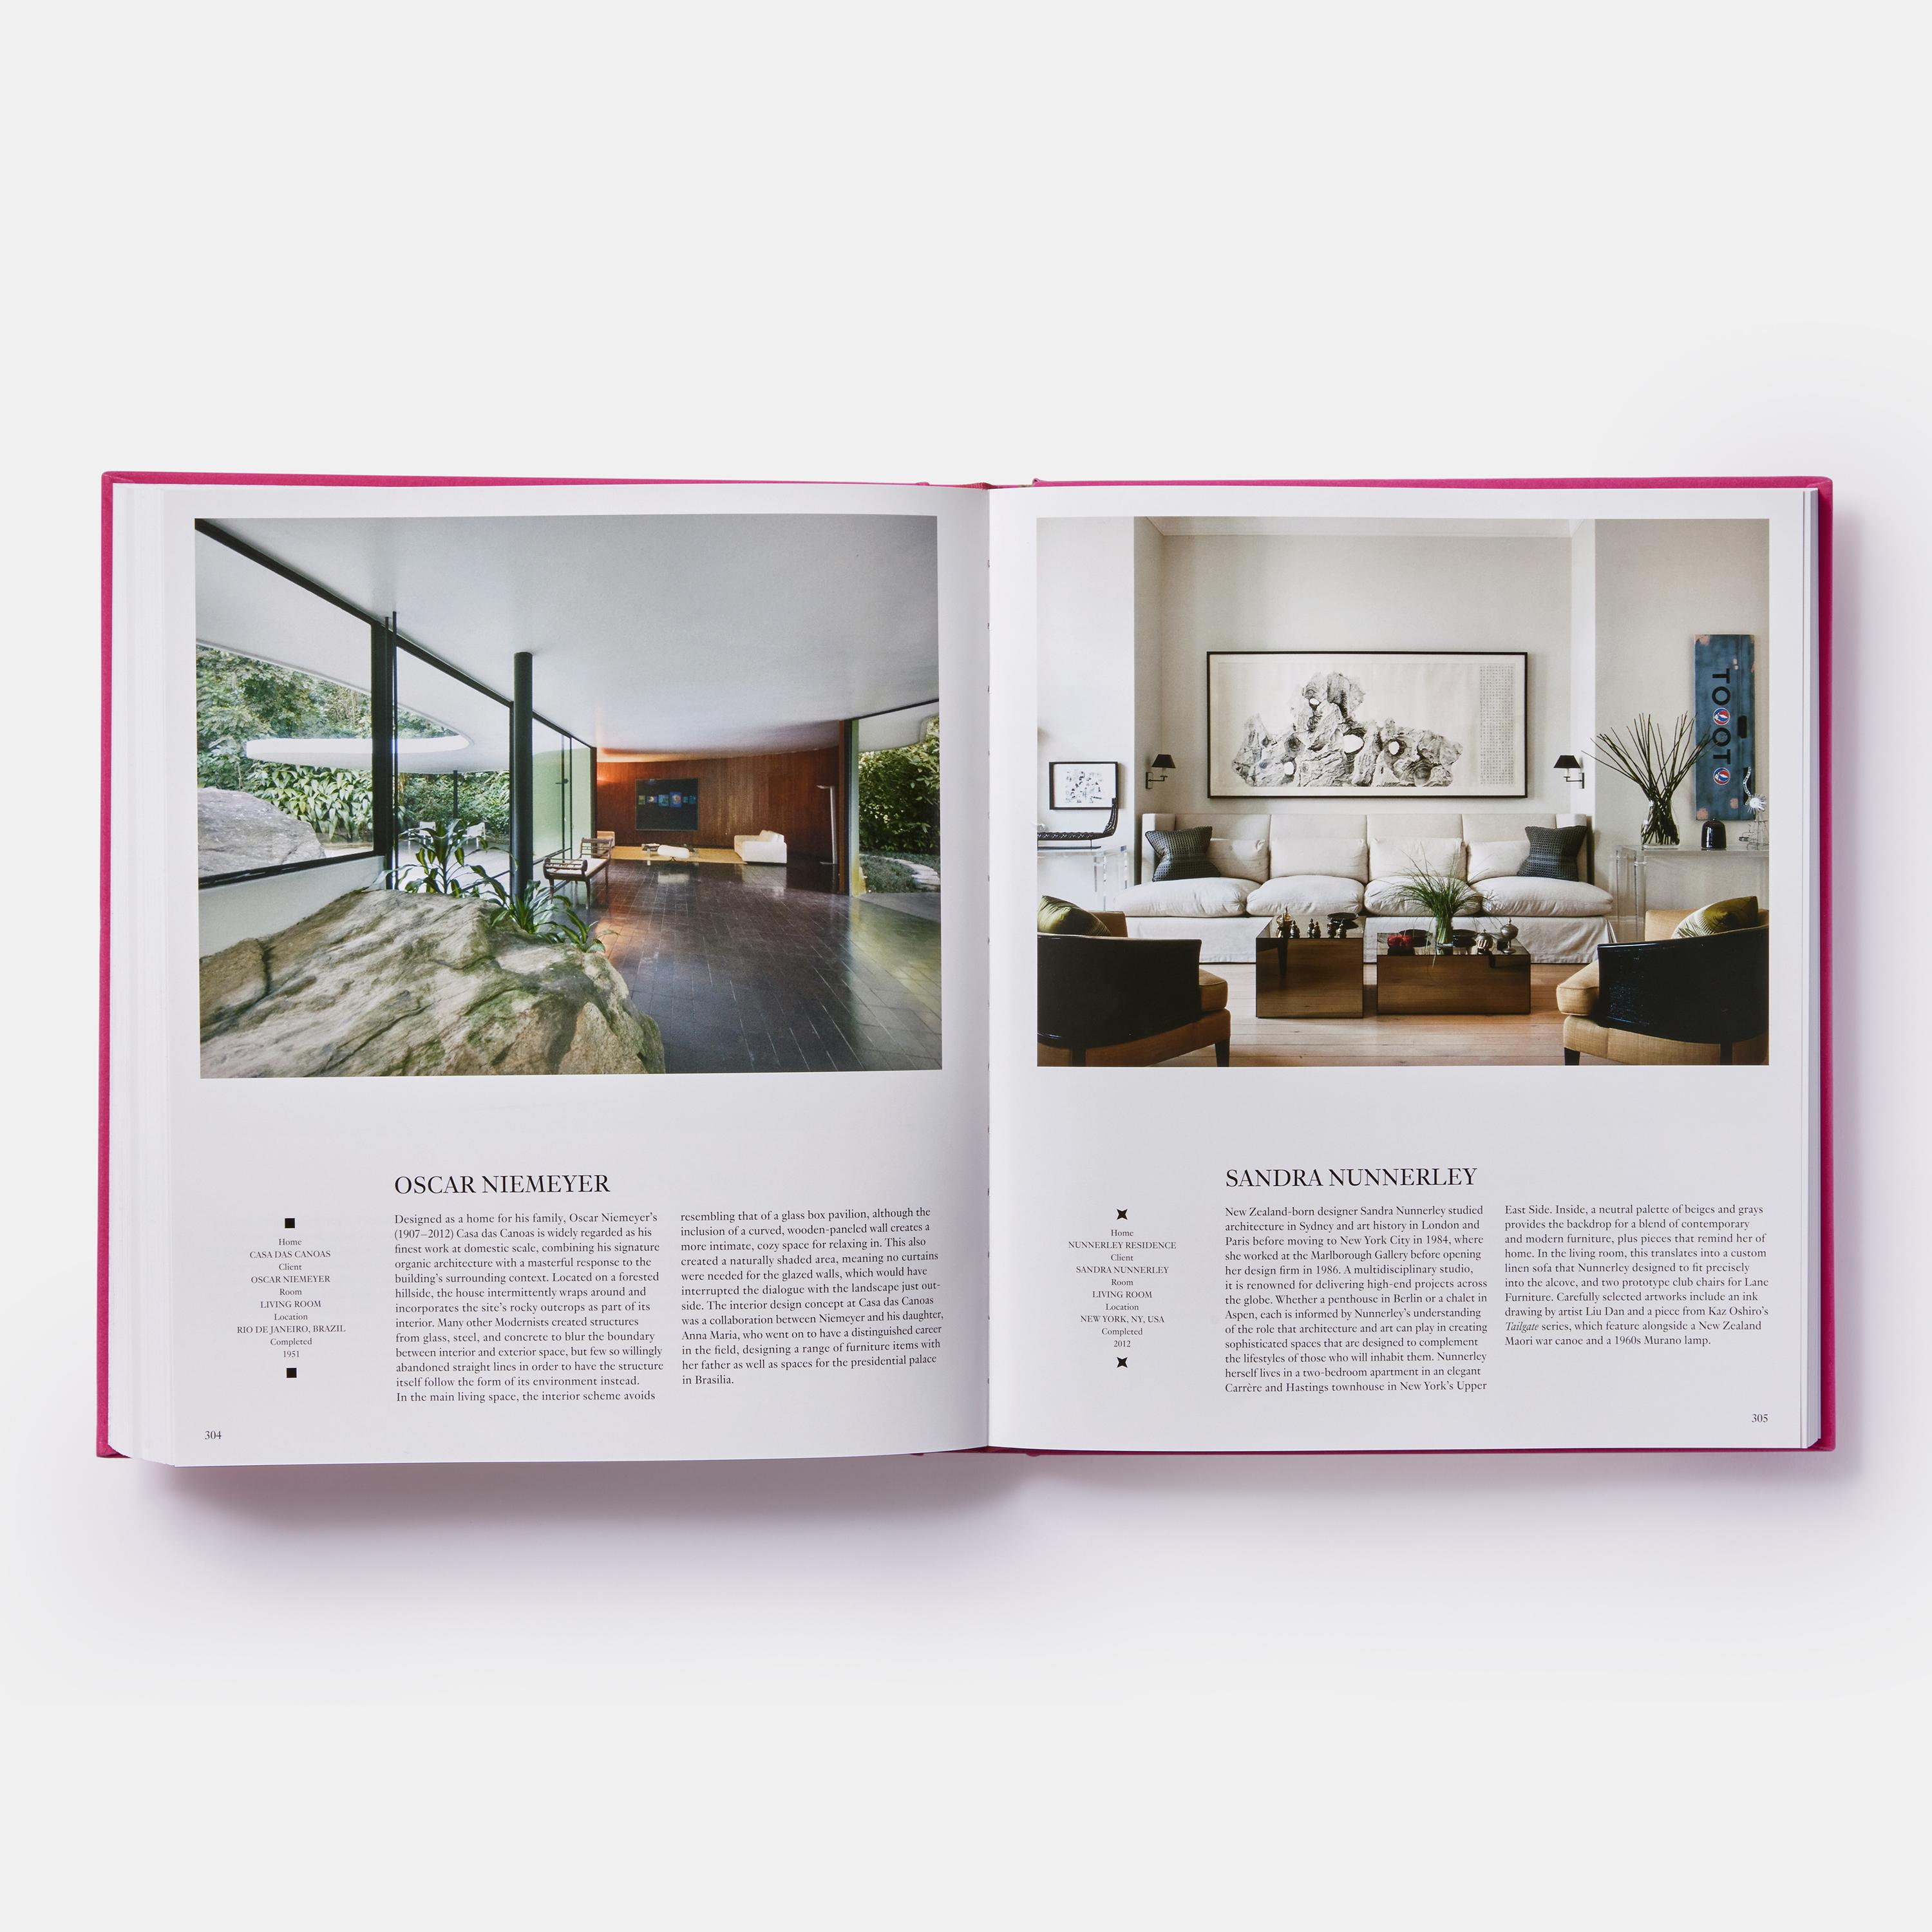 The ultimate global celebration of residential design and decorating 

With 400 rooms organized by designer from A-Z, this much-lauded book goes beyond decorators, designers, and architects to highlight exquisite interiors designed by fashion